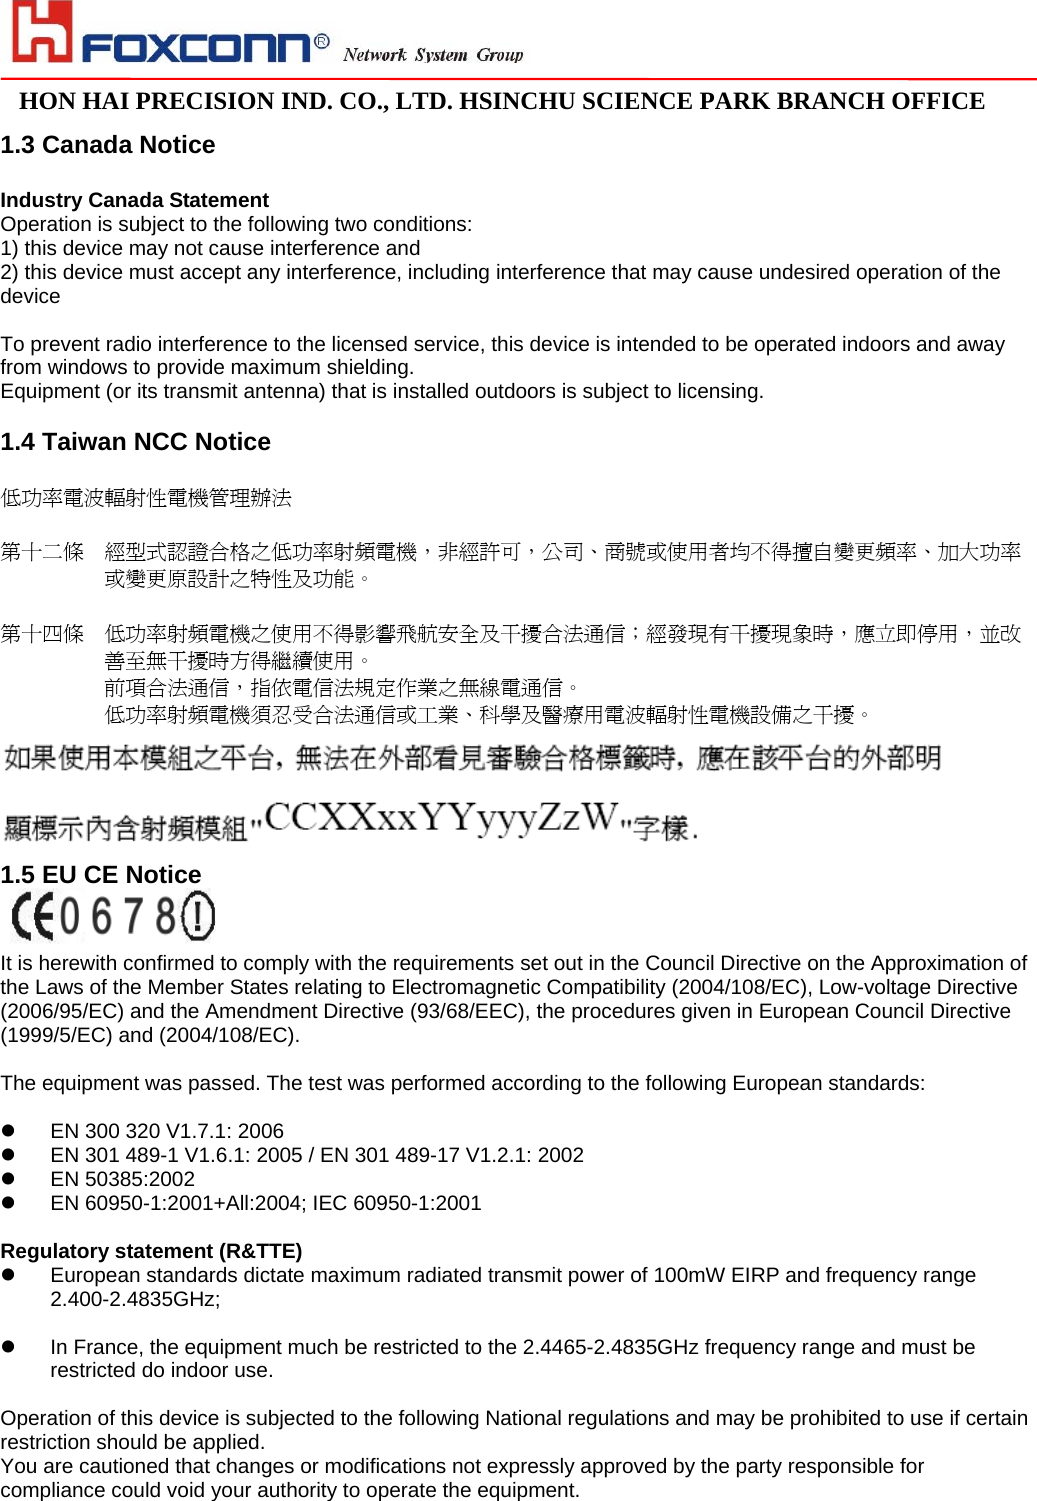                                                                                                                                                                                                                                                                                                                               HON HAI PRECISION IND. CO., LTD. HSINCHU SCIENCE PARK BRANCH OFFICE                              1.3 Canada Notice  Industry Canada Statement Operation is subject to the following two conditions: 1) this device may not cause interference and 2) this device must accept any interference, including interference that may cause undesired operation of the device  To prevent radio interference to the licensed service, this device is intended to be operated indoors and away from windows to provide maximum shielding. Equipment (or its transmit antenna) that is installed outdoors is subject to licensing.  1.4 Taiwan NCC Notice  低功率電波輻射性電機管理辦法  第十二條  經型式認證合格之低功率射頻電機，非經許可，公司、商號或使用者均不得擅自變更頻率、加大功率或變更原設計之特性及功能。    第十四條  低功率射頻電機之使用不得影響飛航安全及干擾合法通信；經發現有干擾現象時，應立即停用，並改善至無干擾時方得繼續使用。 前項合法通信，指依電信法規定作業之無線電通信。 低功率射頻電機須忍受合法通信或工業、科學及醫療用電波輻射性電機設備之干擾。  1.5 EU CE Notice    It is herewith confirmed to comply with the requirements set out in the Council Directive on the Approximation of the Laws of the Member States relating to Electromagnetic Compatibility (2004/108/EC), Low-voltage Directive (2006/95/EC) and the Amendment Directive (93/68/EEC), the procedures given in European Council Directive (1999/5/EC) and (2004/108/EC).  The equipment was passed. The test was performed according to the following European standards:    EN 300 320 V1.7.1: 2006   EN 301 489-1 V1.6.1: 2005 / EN 301 489-17 V1.2.1: 2002   EN 50385:2002   EN 60950-1:2001+All:2004; IEC 60950-1:2001  Regulatory statement (R&amp;TTE)   European standards dictate maximum radiated transmit power of 100mW EIRP and frequency range 2.400-2.4835GHz;    In France, the equipment much be restricted to the 2.4465-2.4835GHz frequency range and must be restricted do indoor use.  Operation of this device is subjected to the following National regulations and may be prohibited to use if certain restriction should be applied. You are cautioned that changes or modifications not expressly approved by the party responsible for compliance could void your authority to operate the equipment. 